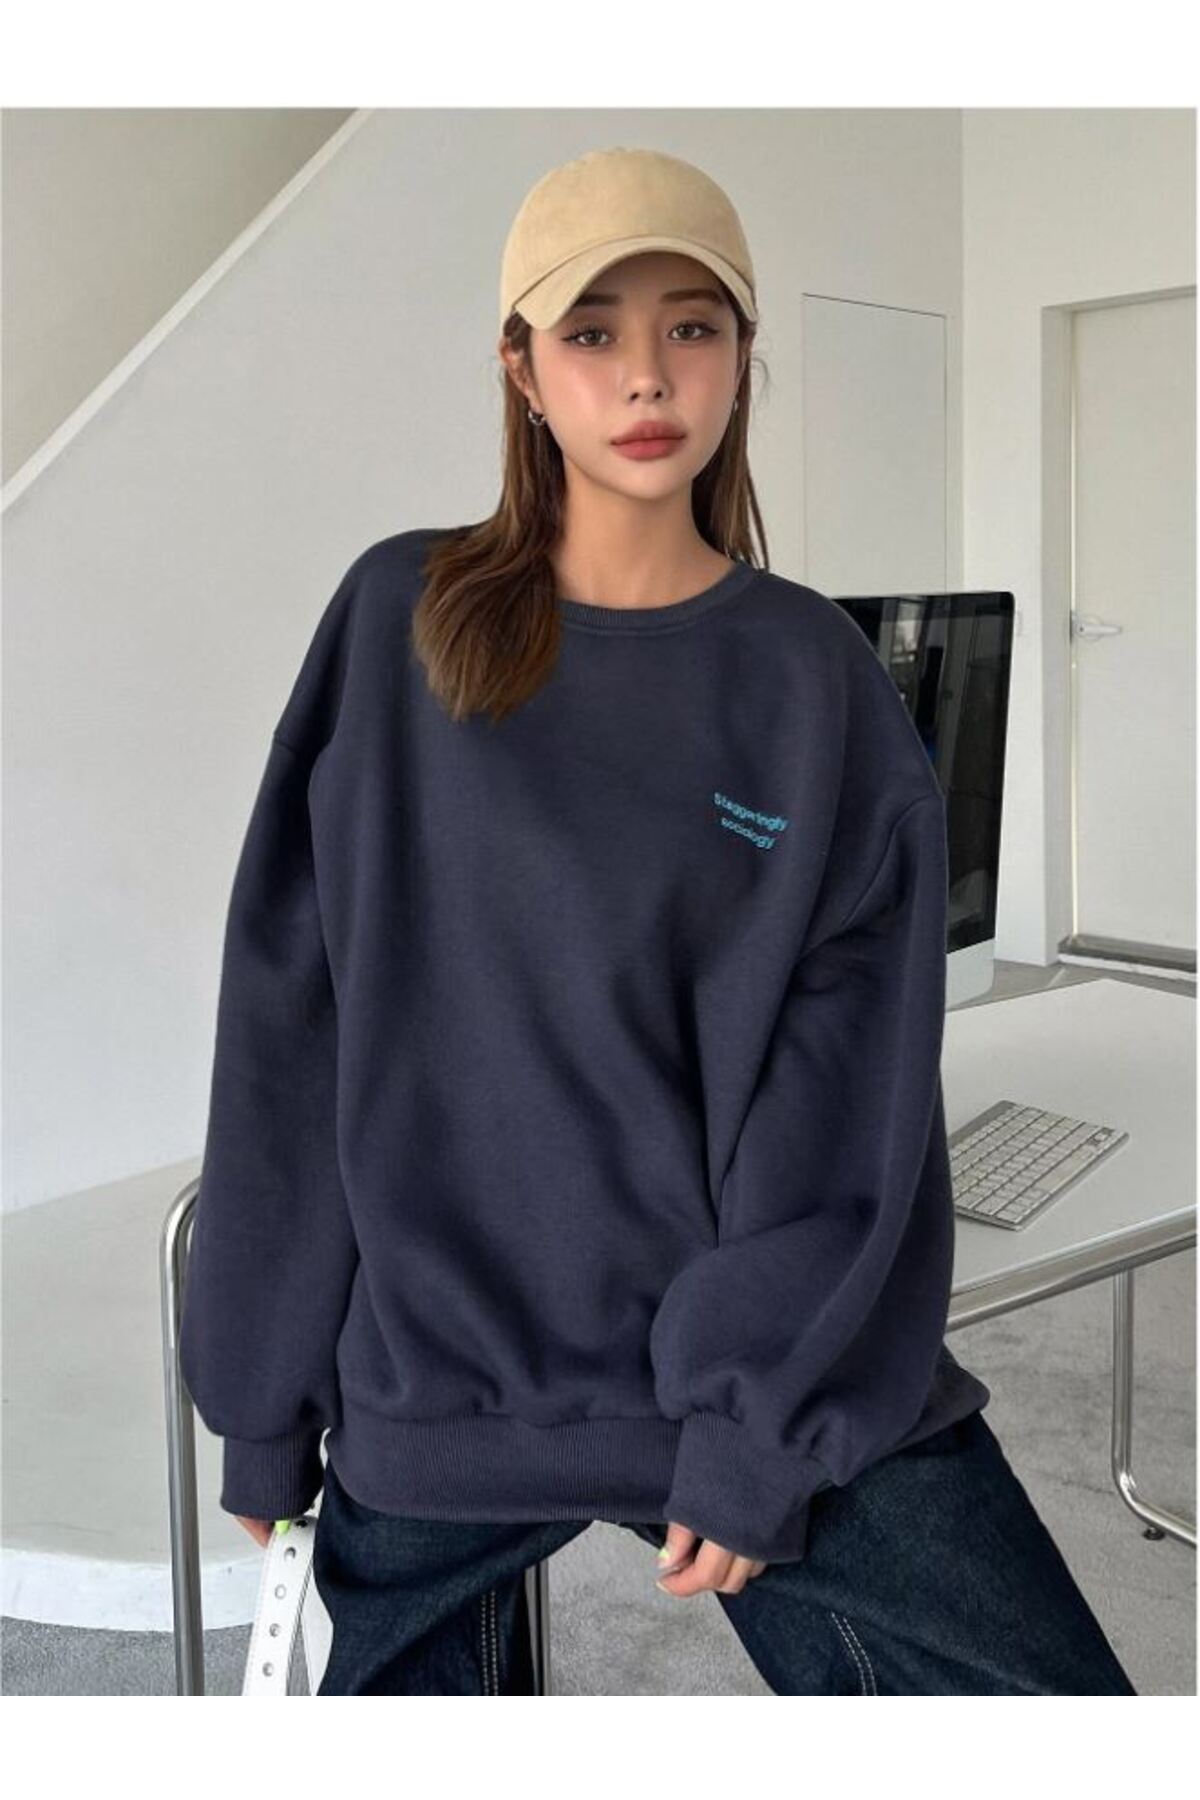 Know Women's Navy Staggertly Printed Crew Neck Sweatshirt